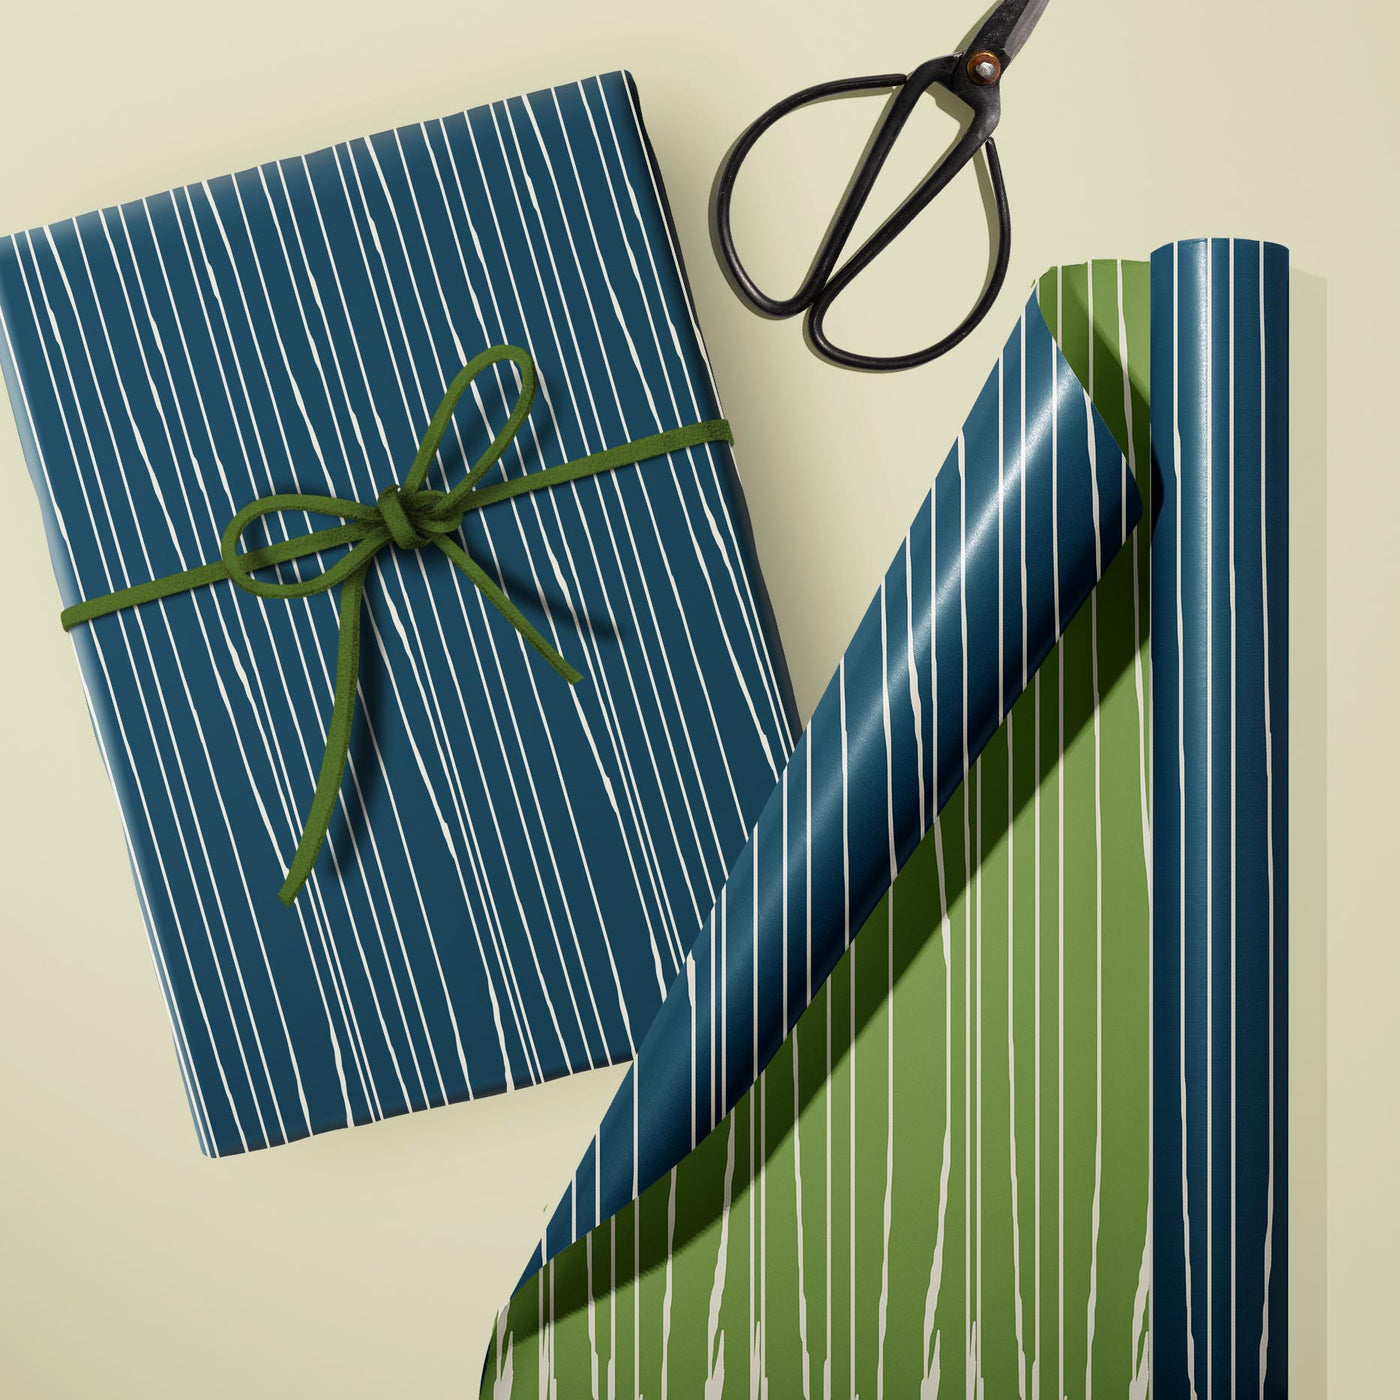 Wrap your gifts in style with our Worn Stripe Blue and Green Double Sided Gift Wrap! This premium quality paper features a mid century modern inspired textural design in both blue and green, perfect for any occasion or DIY craft project. The luxe finish adds a touch of elegance to for any gift giving event.